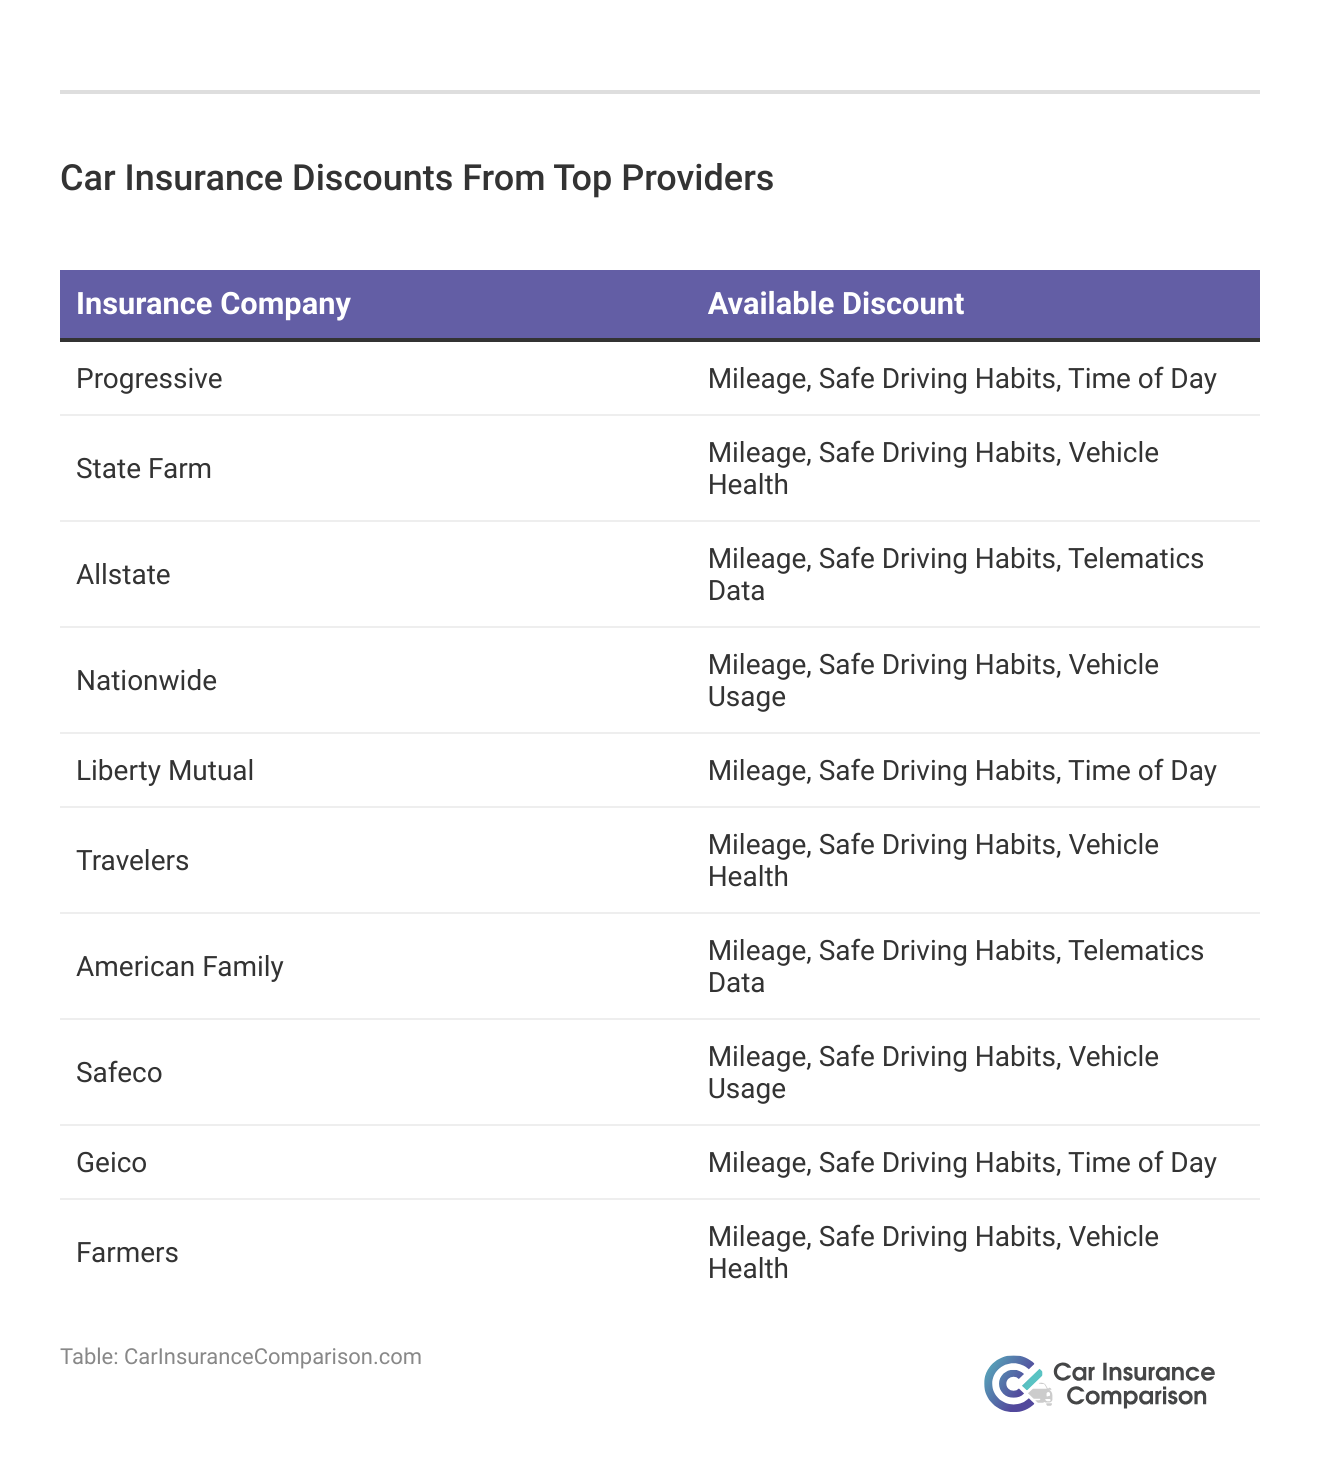 <h3>Car Insurance Discounts From Top Providers</h3>